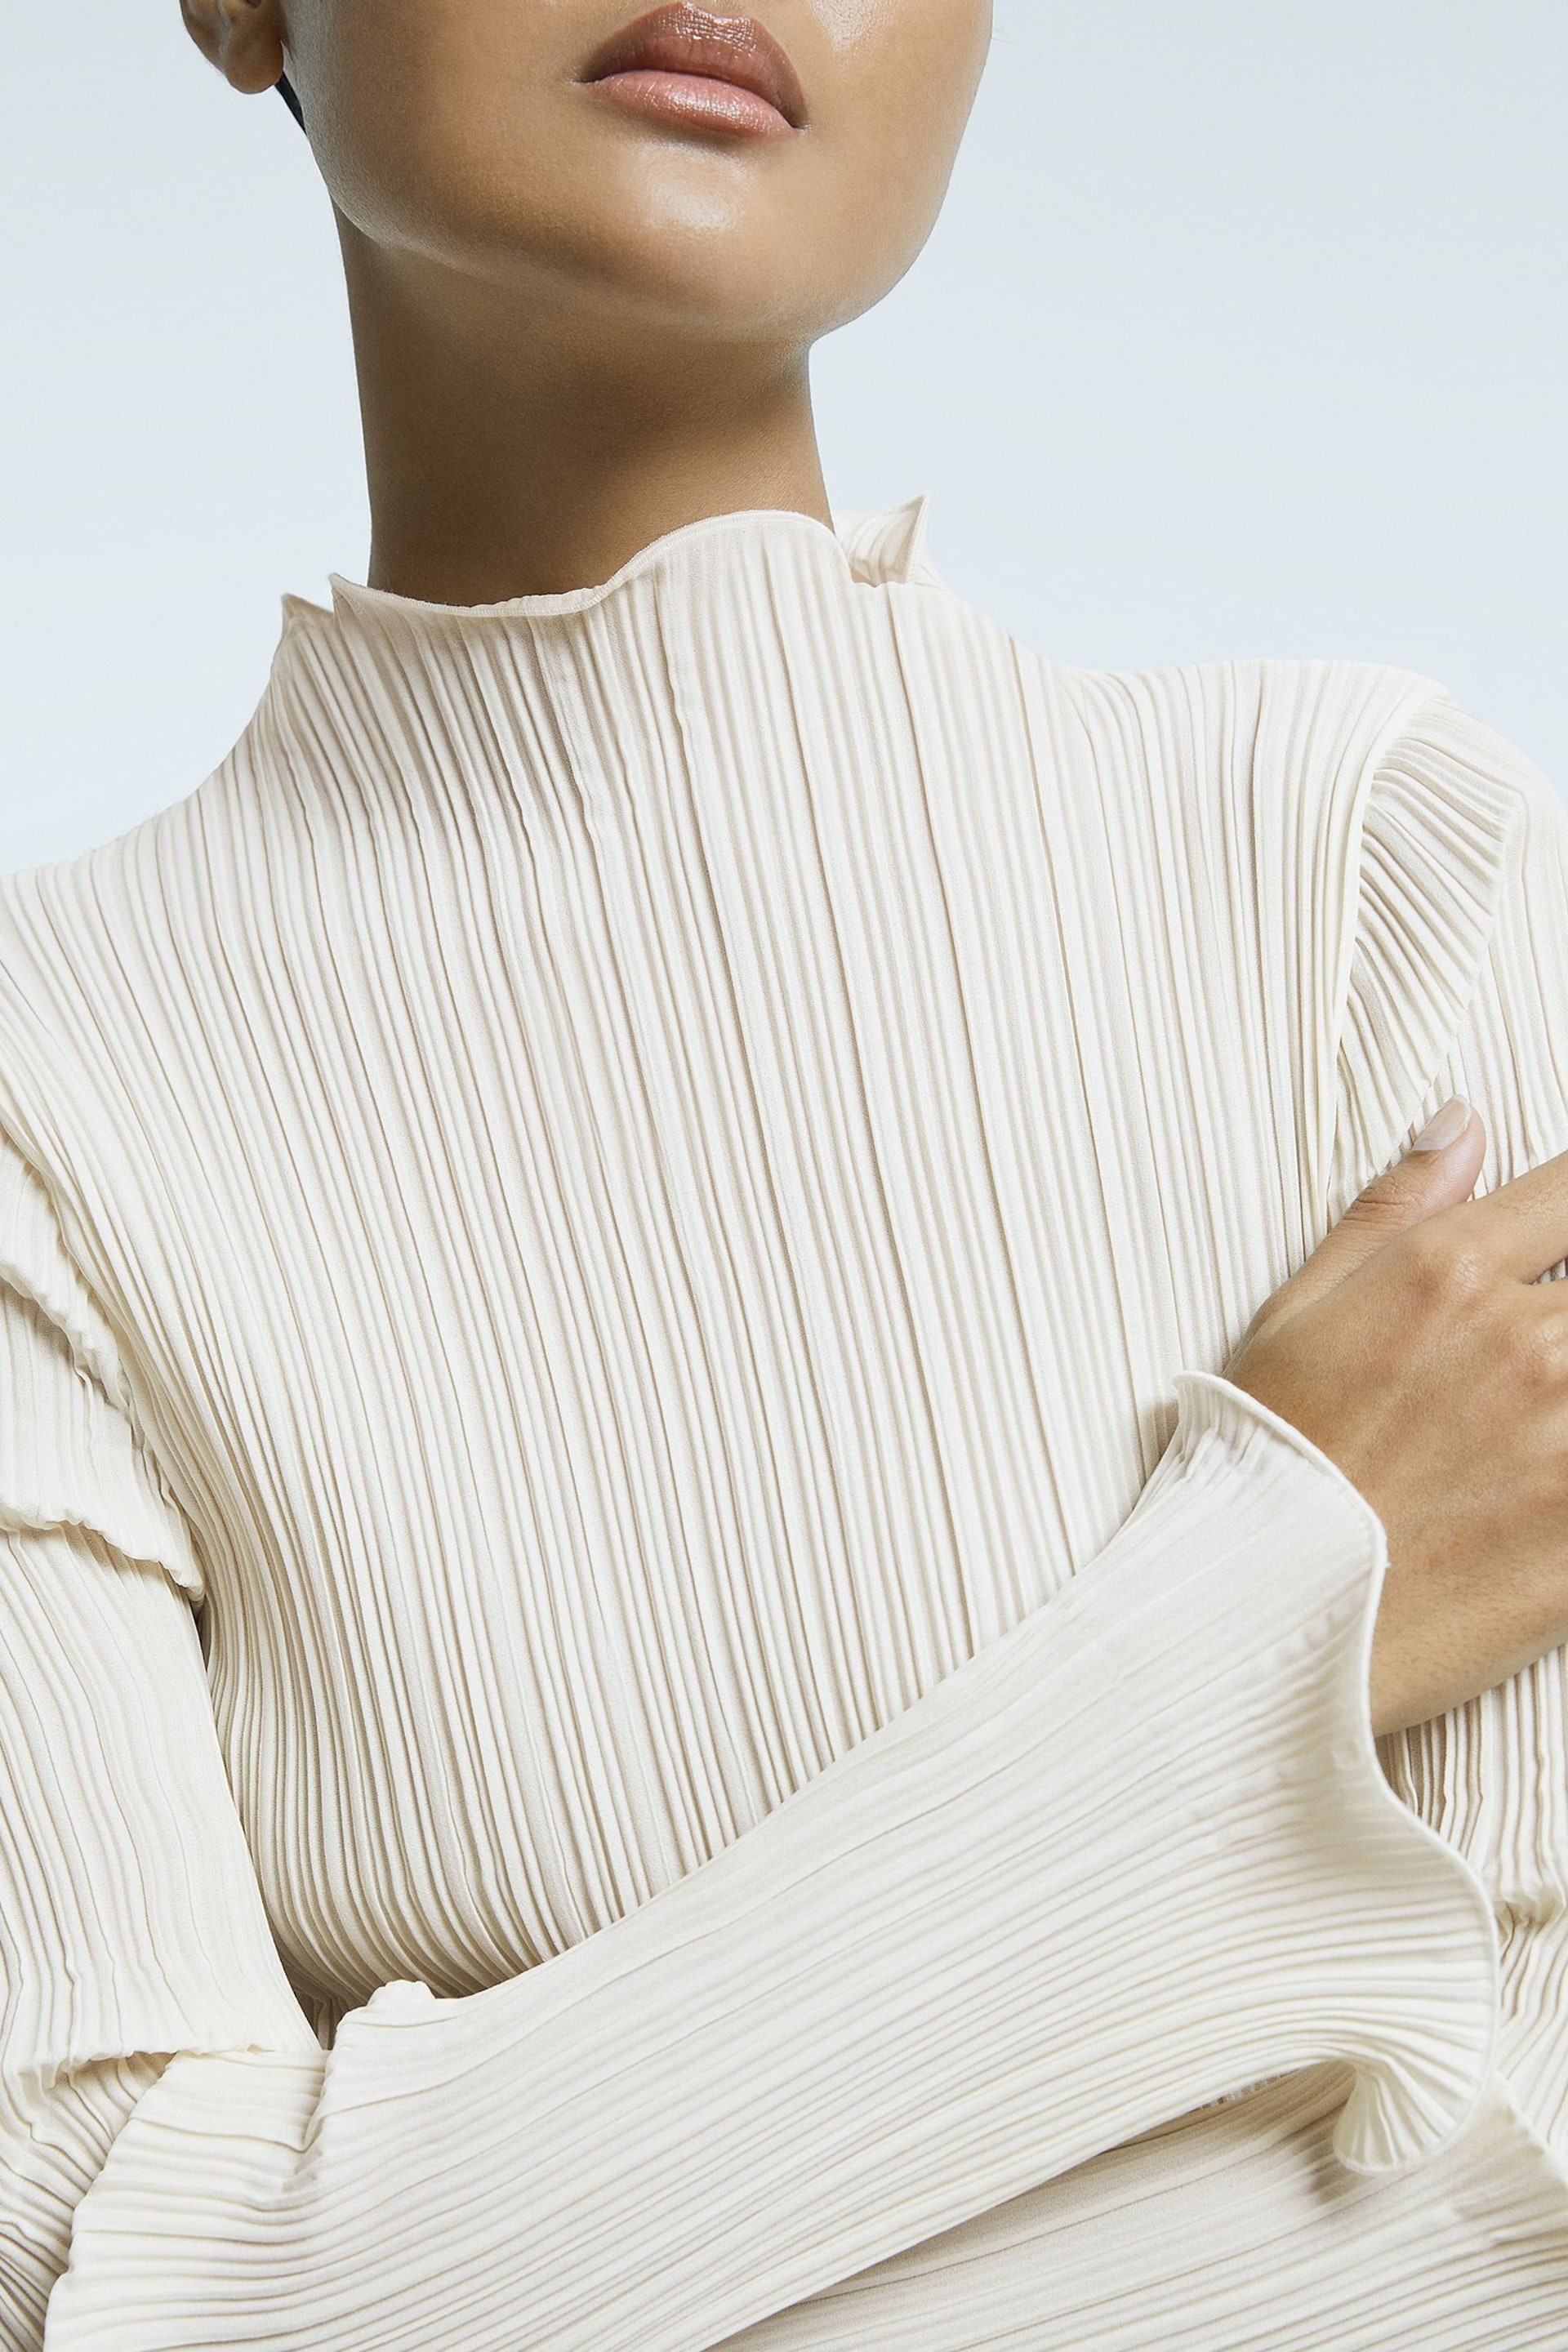 Atelier Fitted Ribbed Ruffle Neck Top - Image 3 of 6